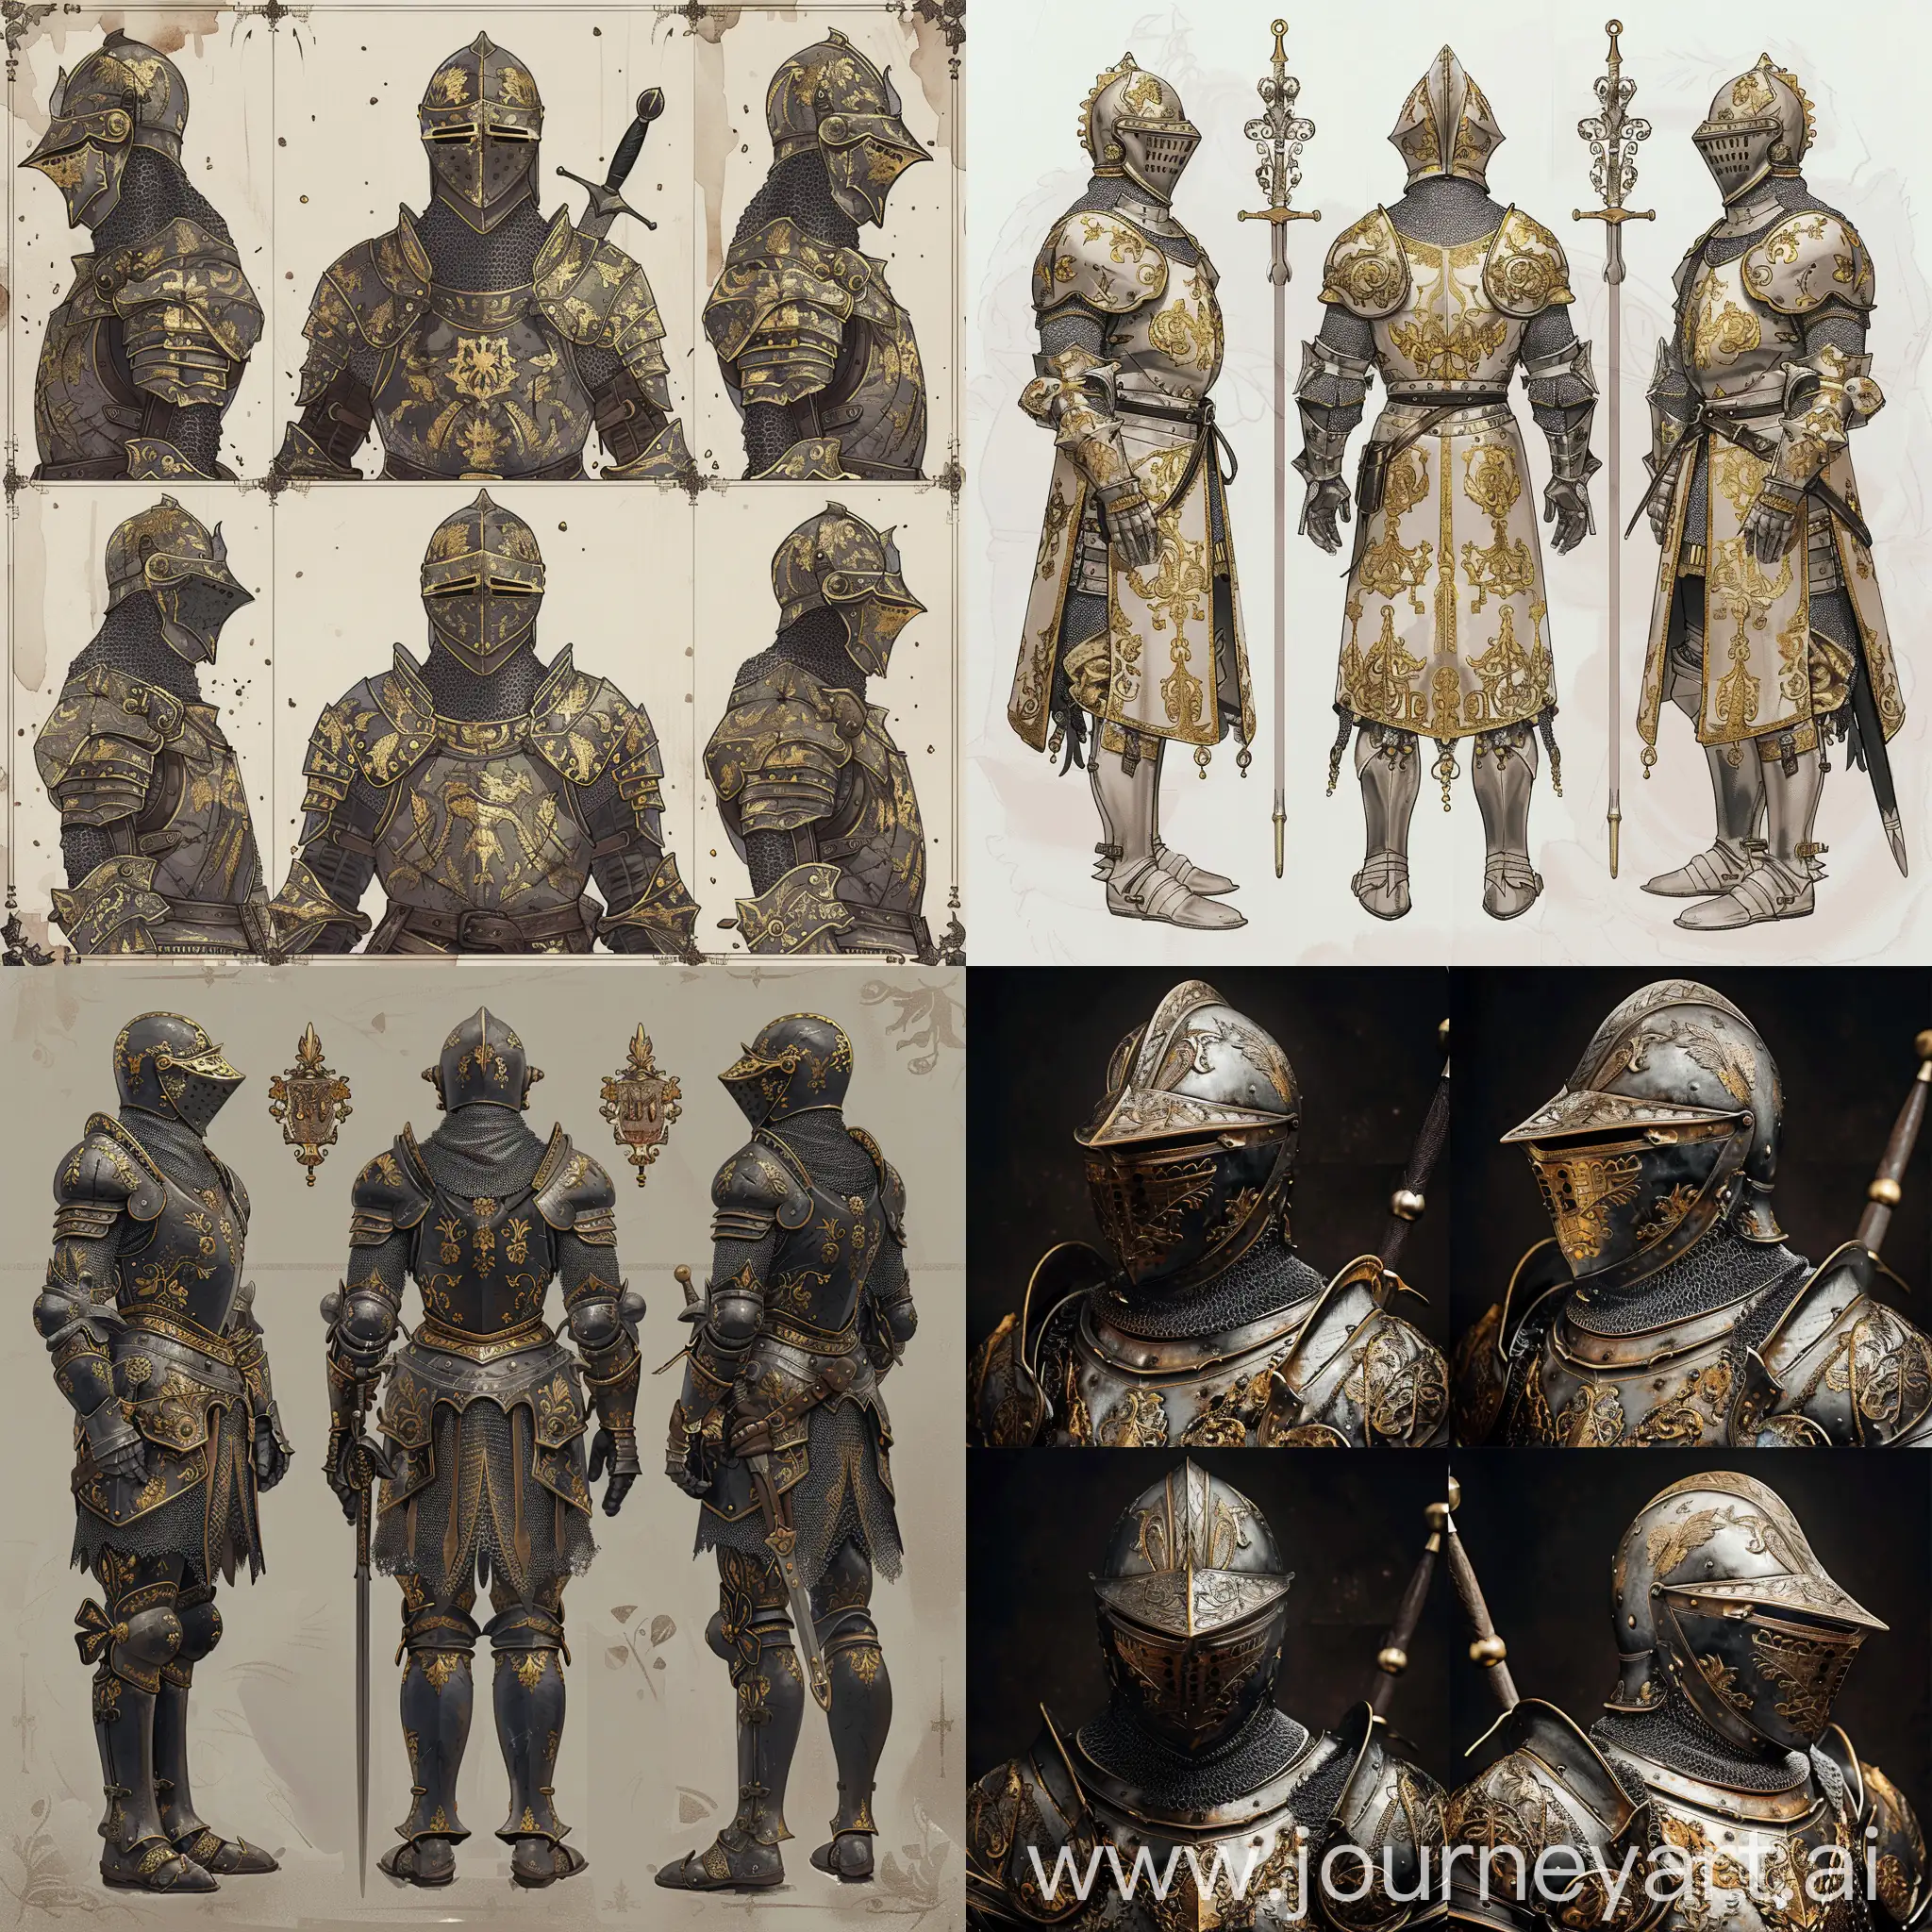 A proud and noble French mercenary knight. He wears magnificent French lamellar armor (interlacing plates) decorated with gold patterns and exquisite details. His head is covered by a helmet with a closed visor, decorated with gold reliefs. Under the brigantines, a chain mail and leather lining are hidden, as well as a visible aketon. In addition, he wears gauntlet bracers, greaves with sabathons, gauntlet shoulder pads and a collar. There is also an elegant sword in the scabbard. He is a duelist with the skills of a field officer. On four sides, the style is drawn